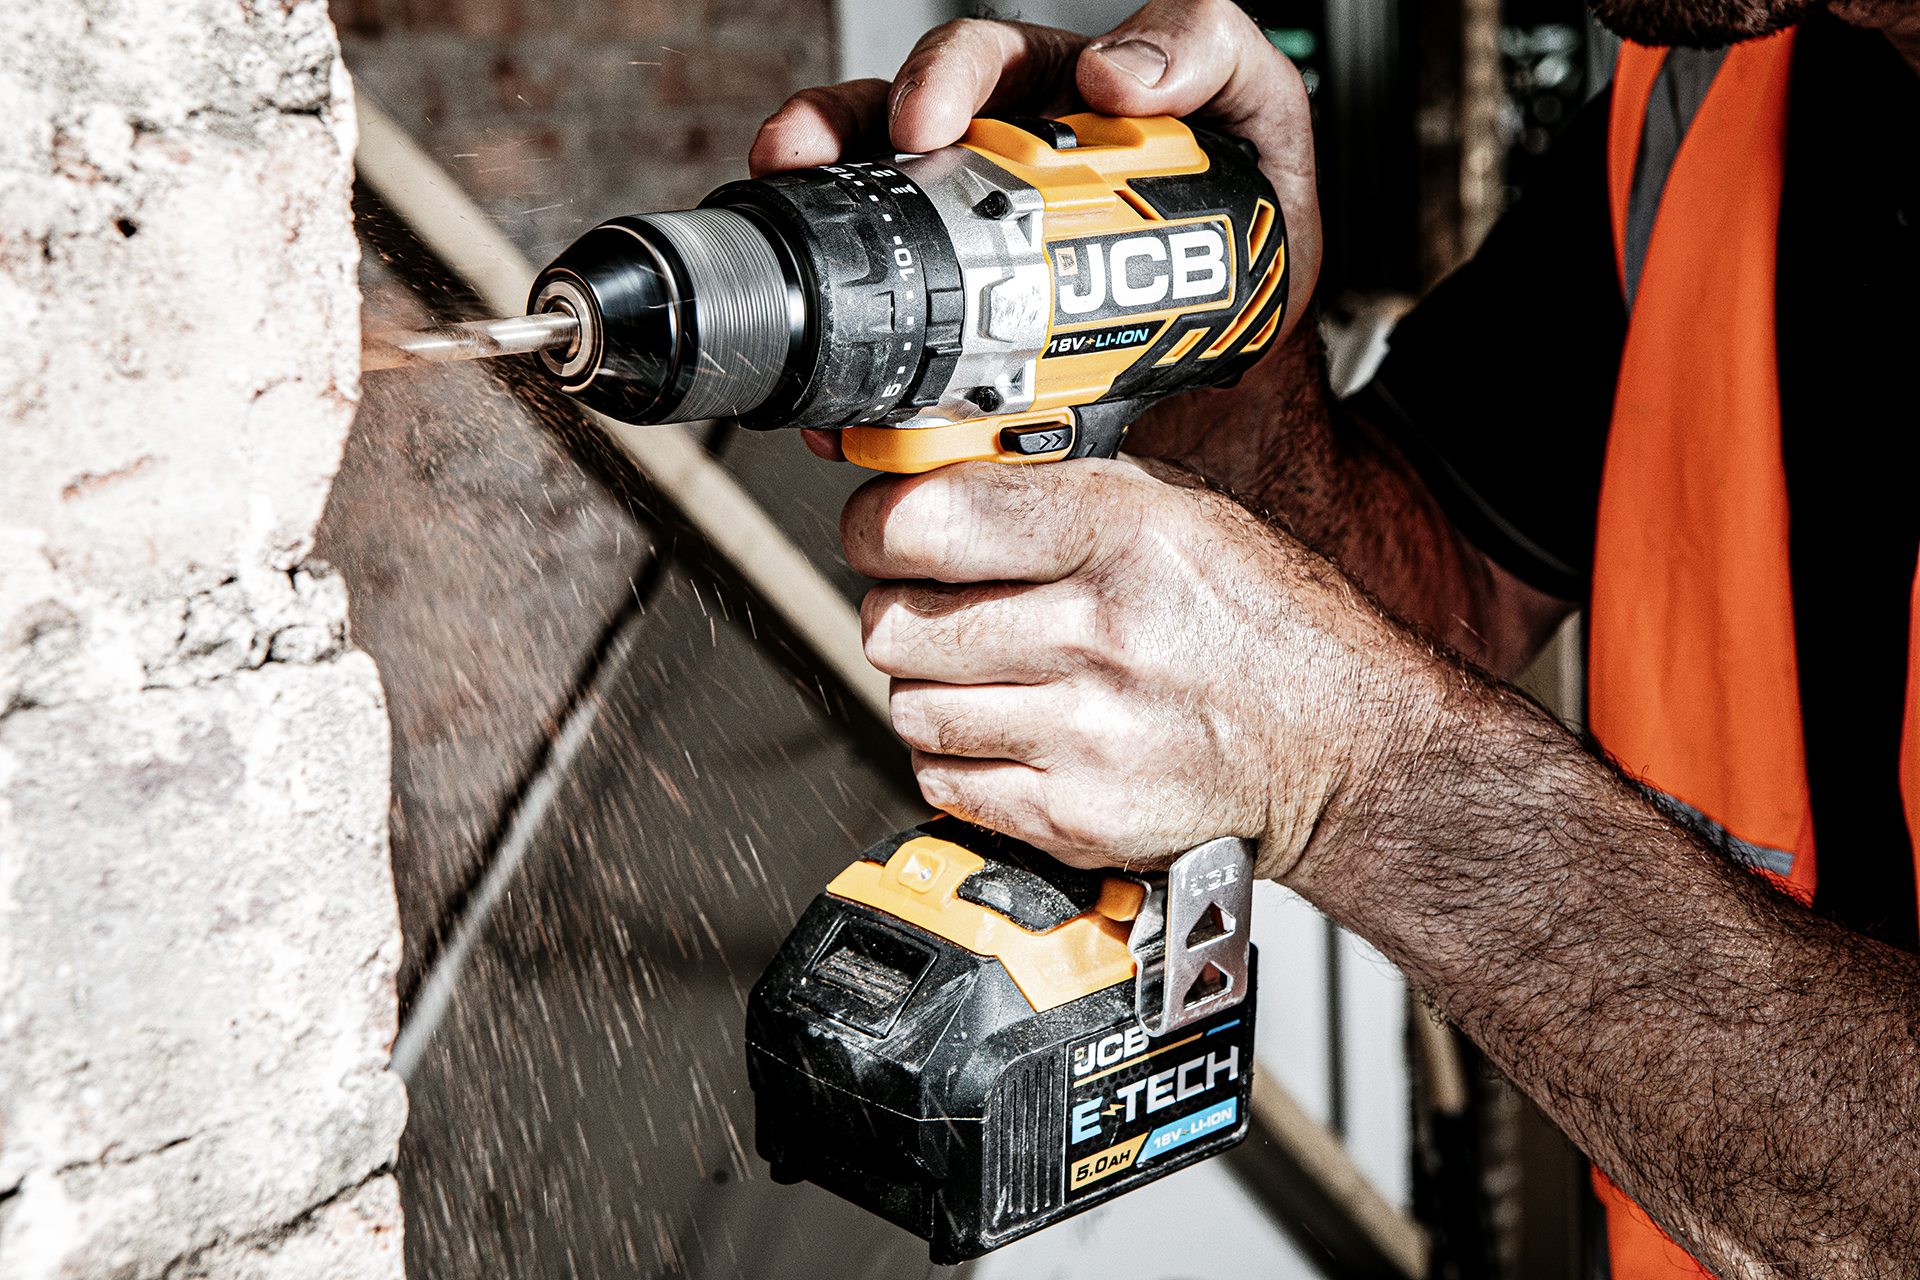 location-photography-for-jcb-tools